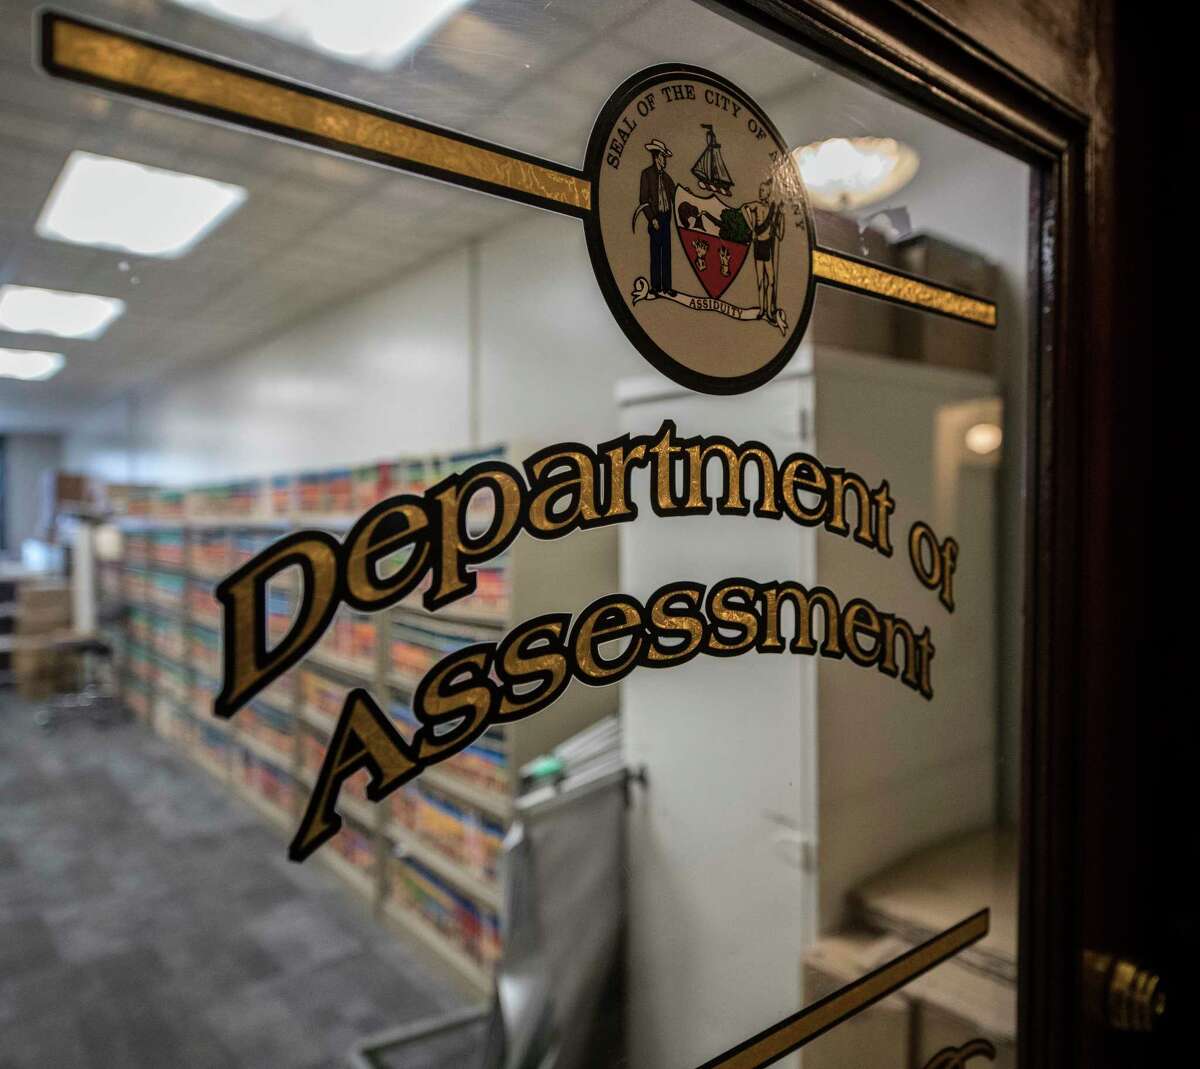 The logo on the door of the Department of Assessment in City Hall Thursday Dec 14, 2017 in Albany, N.Y. (Skip Dickstein/ Times Union)